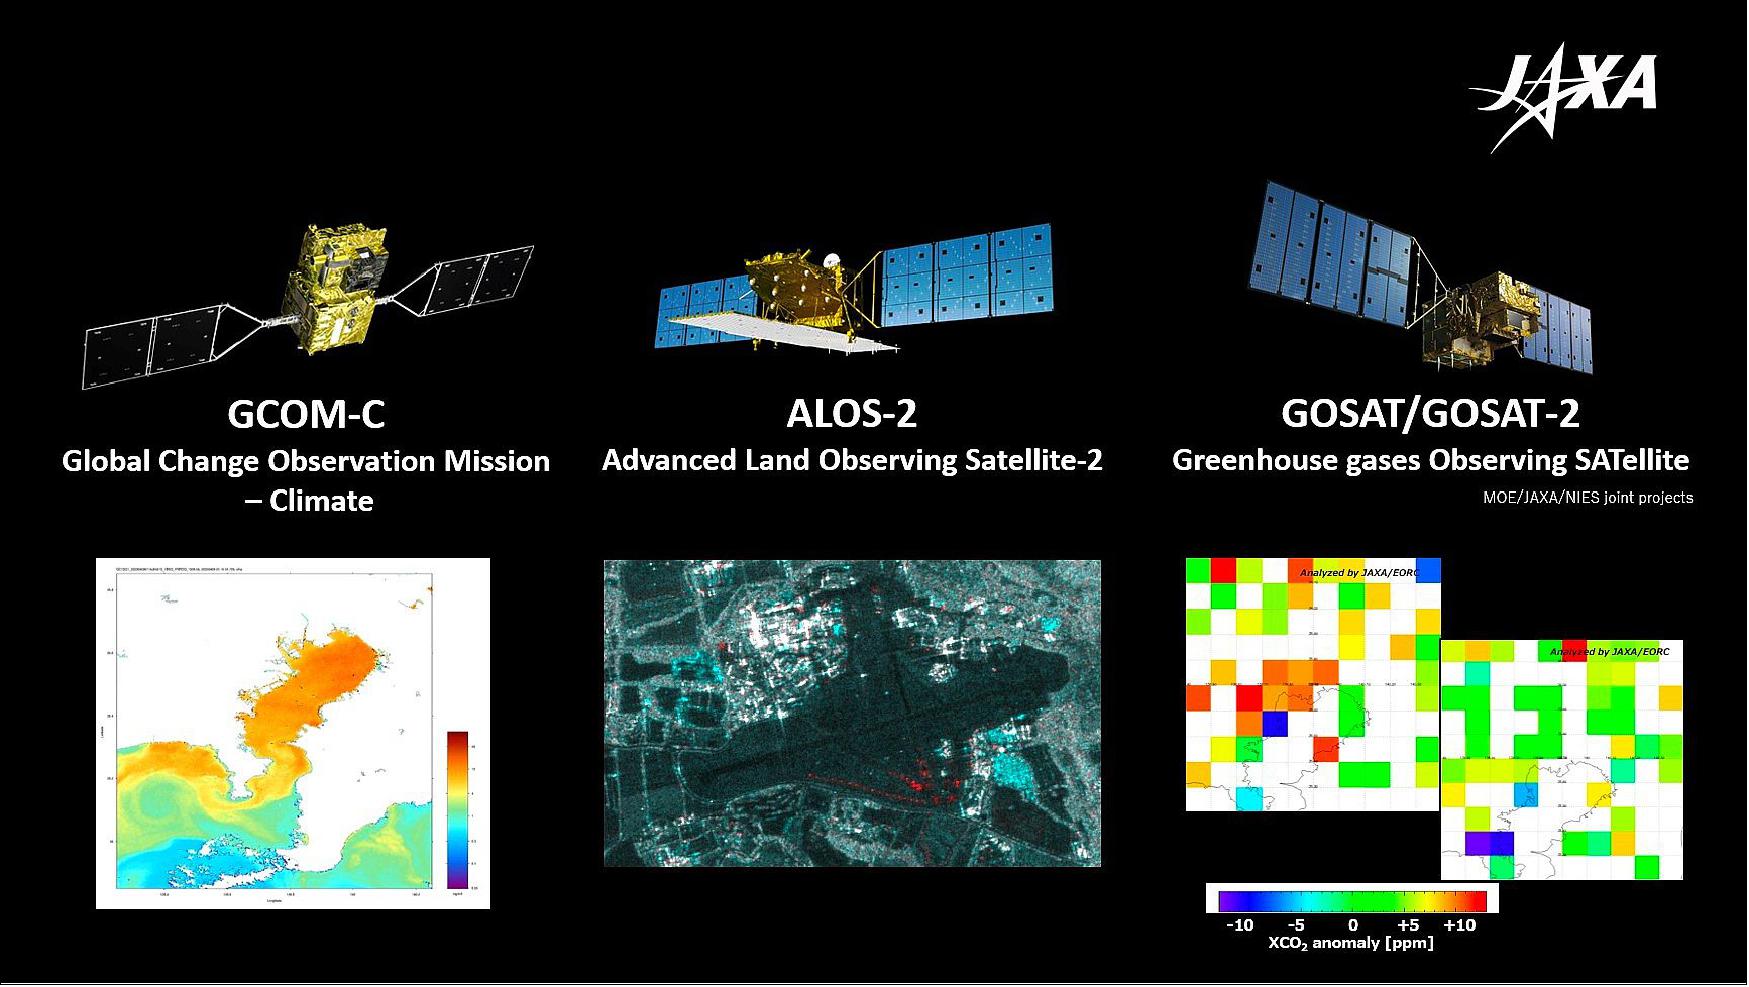 Figure 9: Data from the JAXA Earth-observing satellites GOSAT, ALOS-2 and GCOM-C are contributing to the dashboard to monitor changes in climate, the environment, and socio-economic activities (image credit: JAXA, Koji Terada)